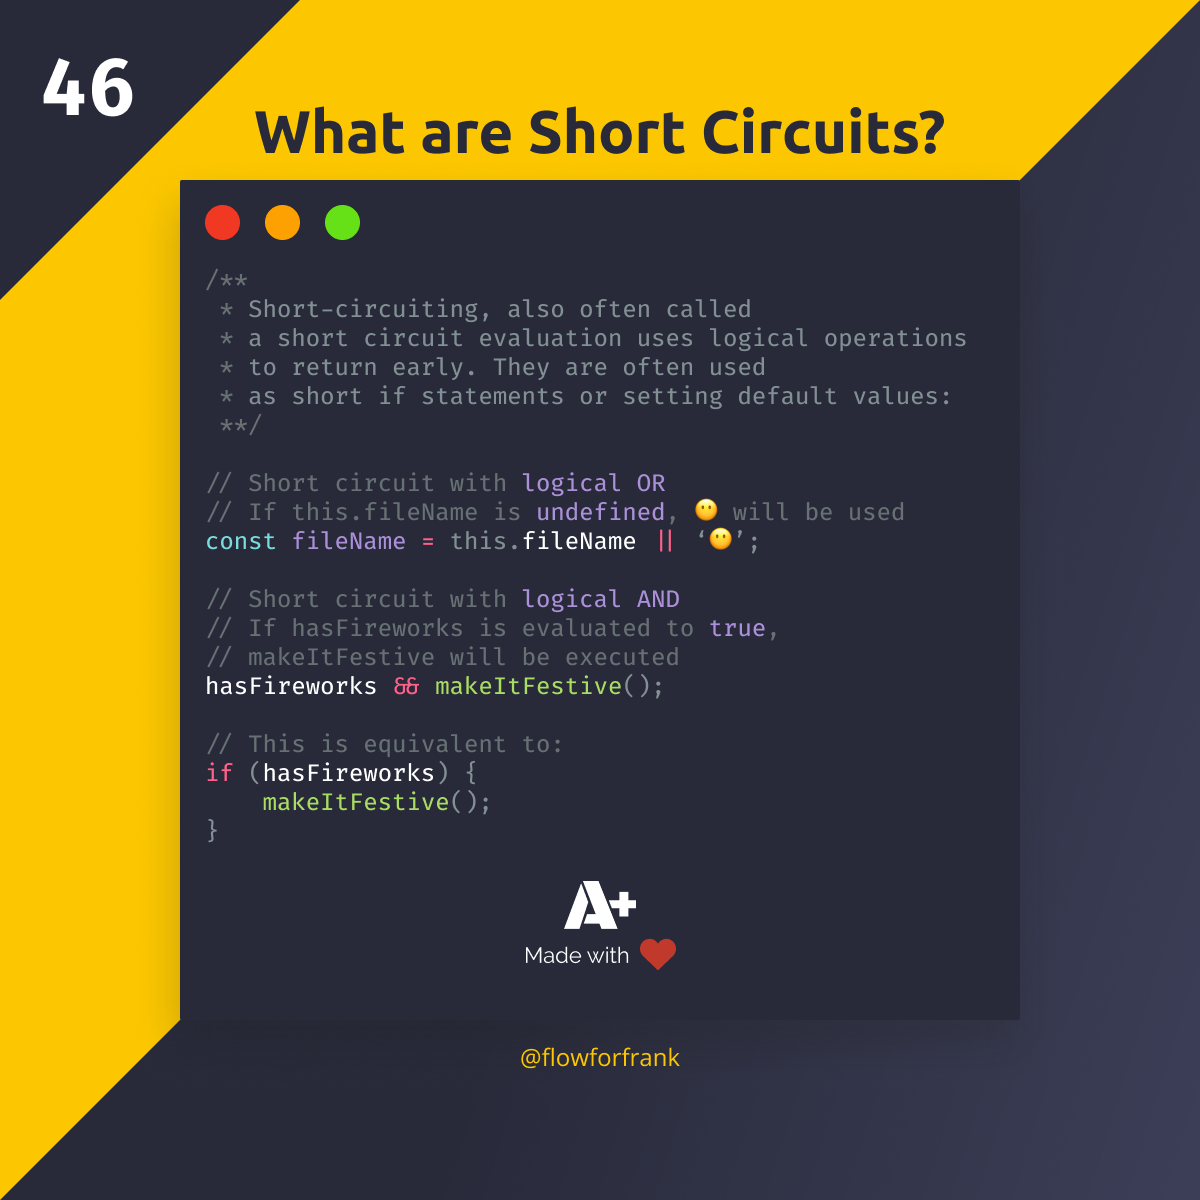 What are Short Circuits?